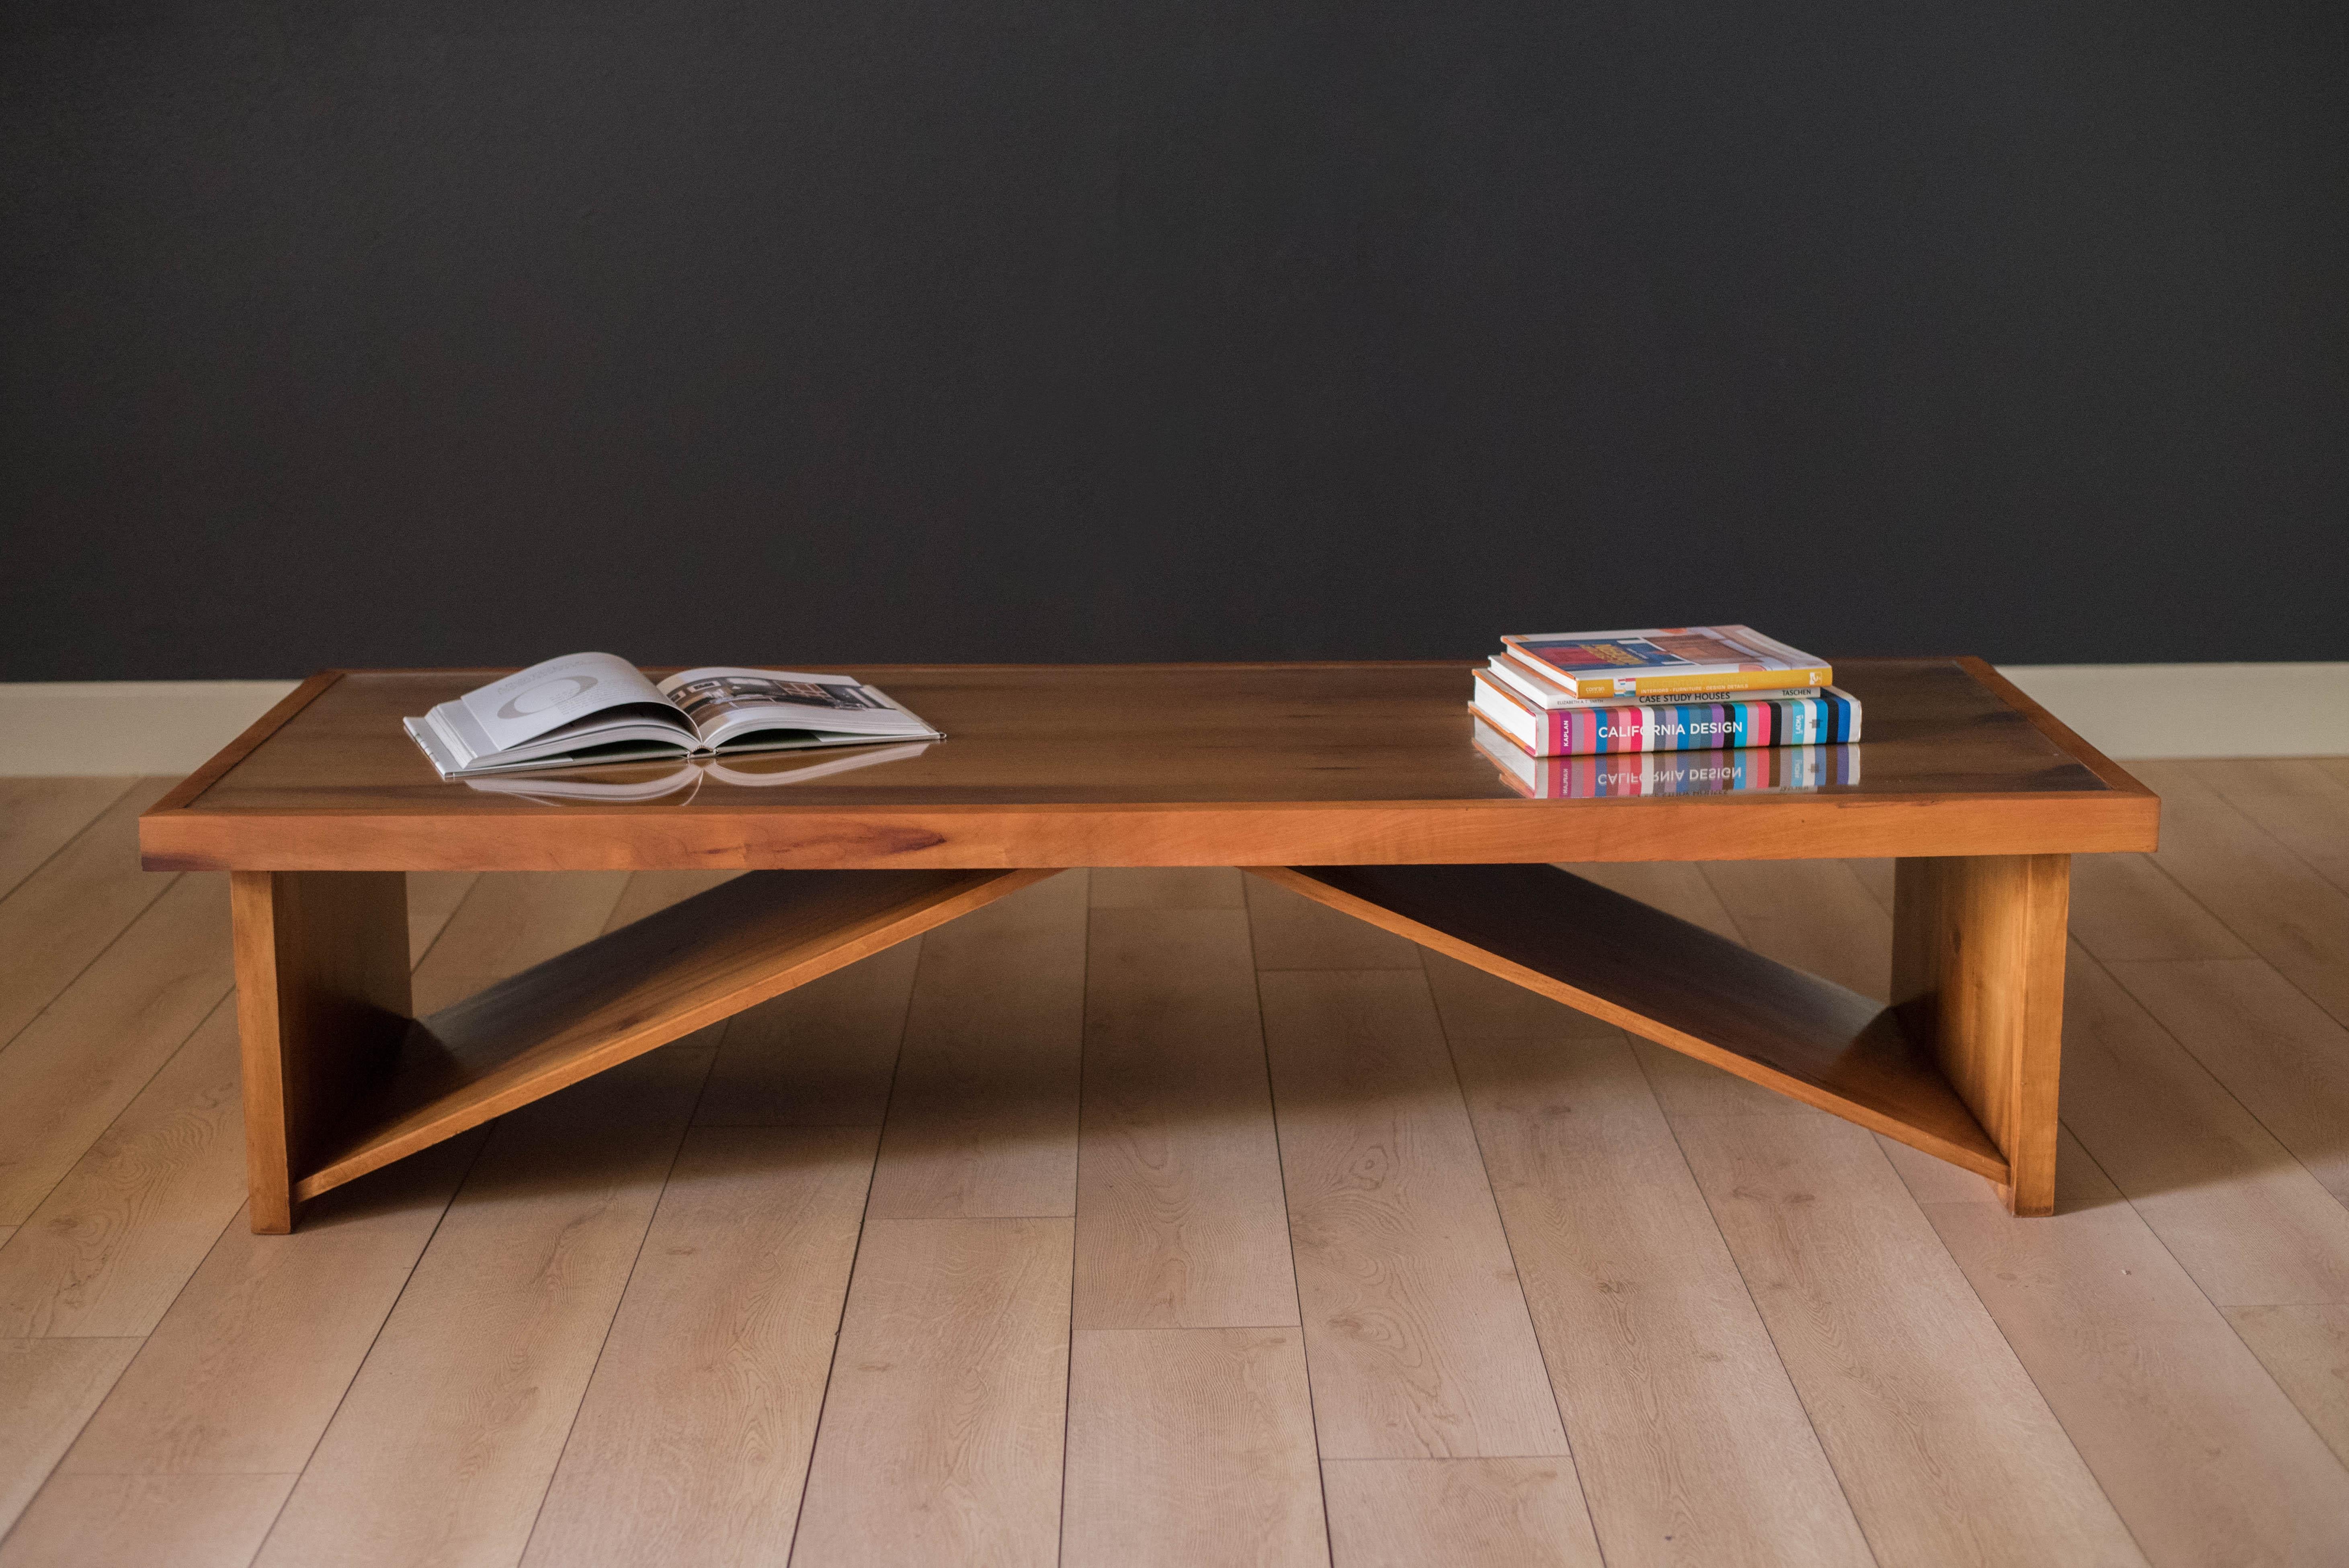 American studio made display bench or coffee table, circa 1970s. This piece includes a glass top insert and is made out of mahogany.